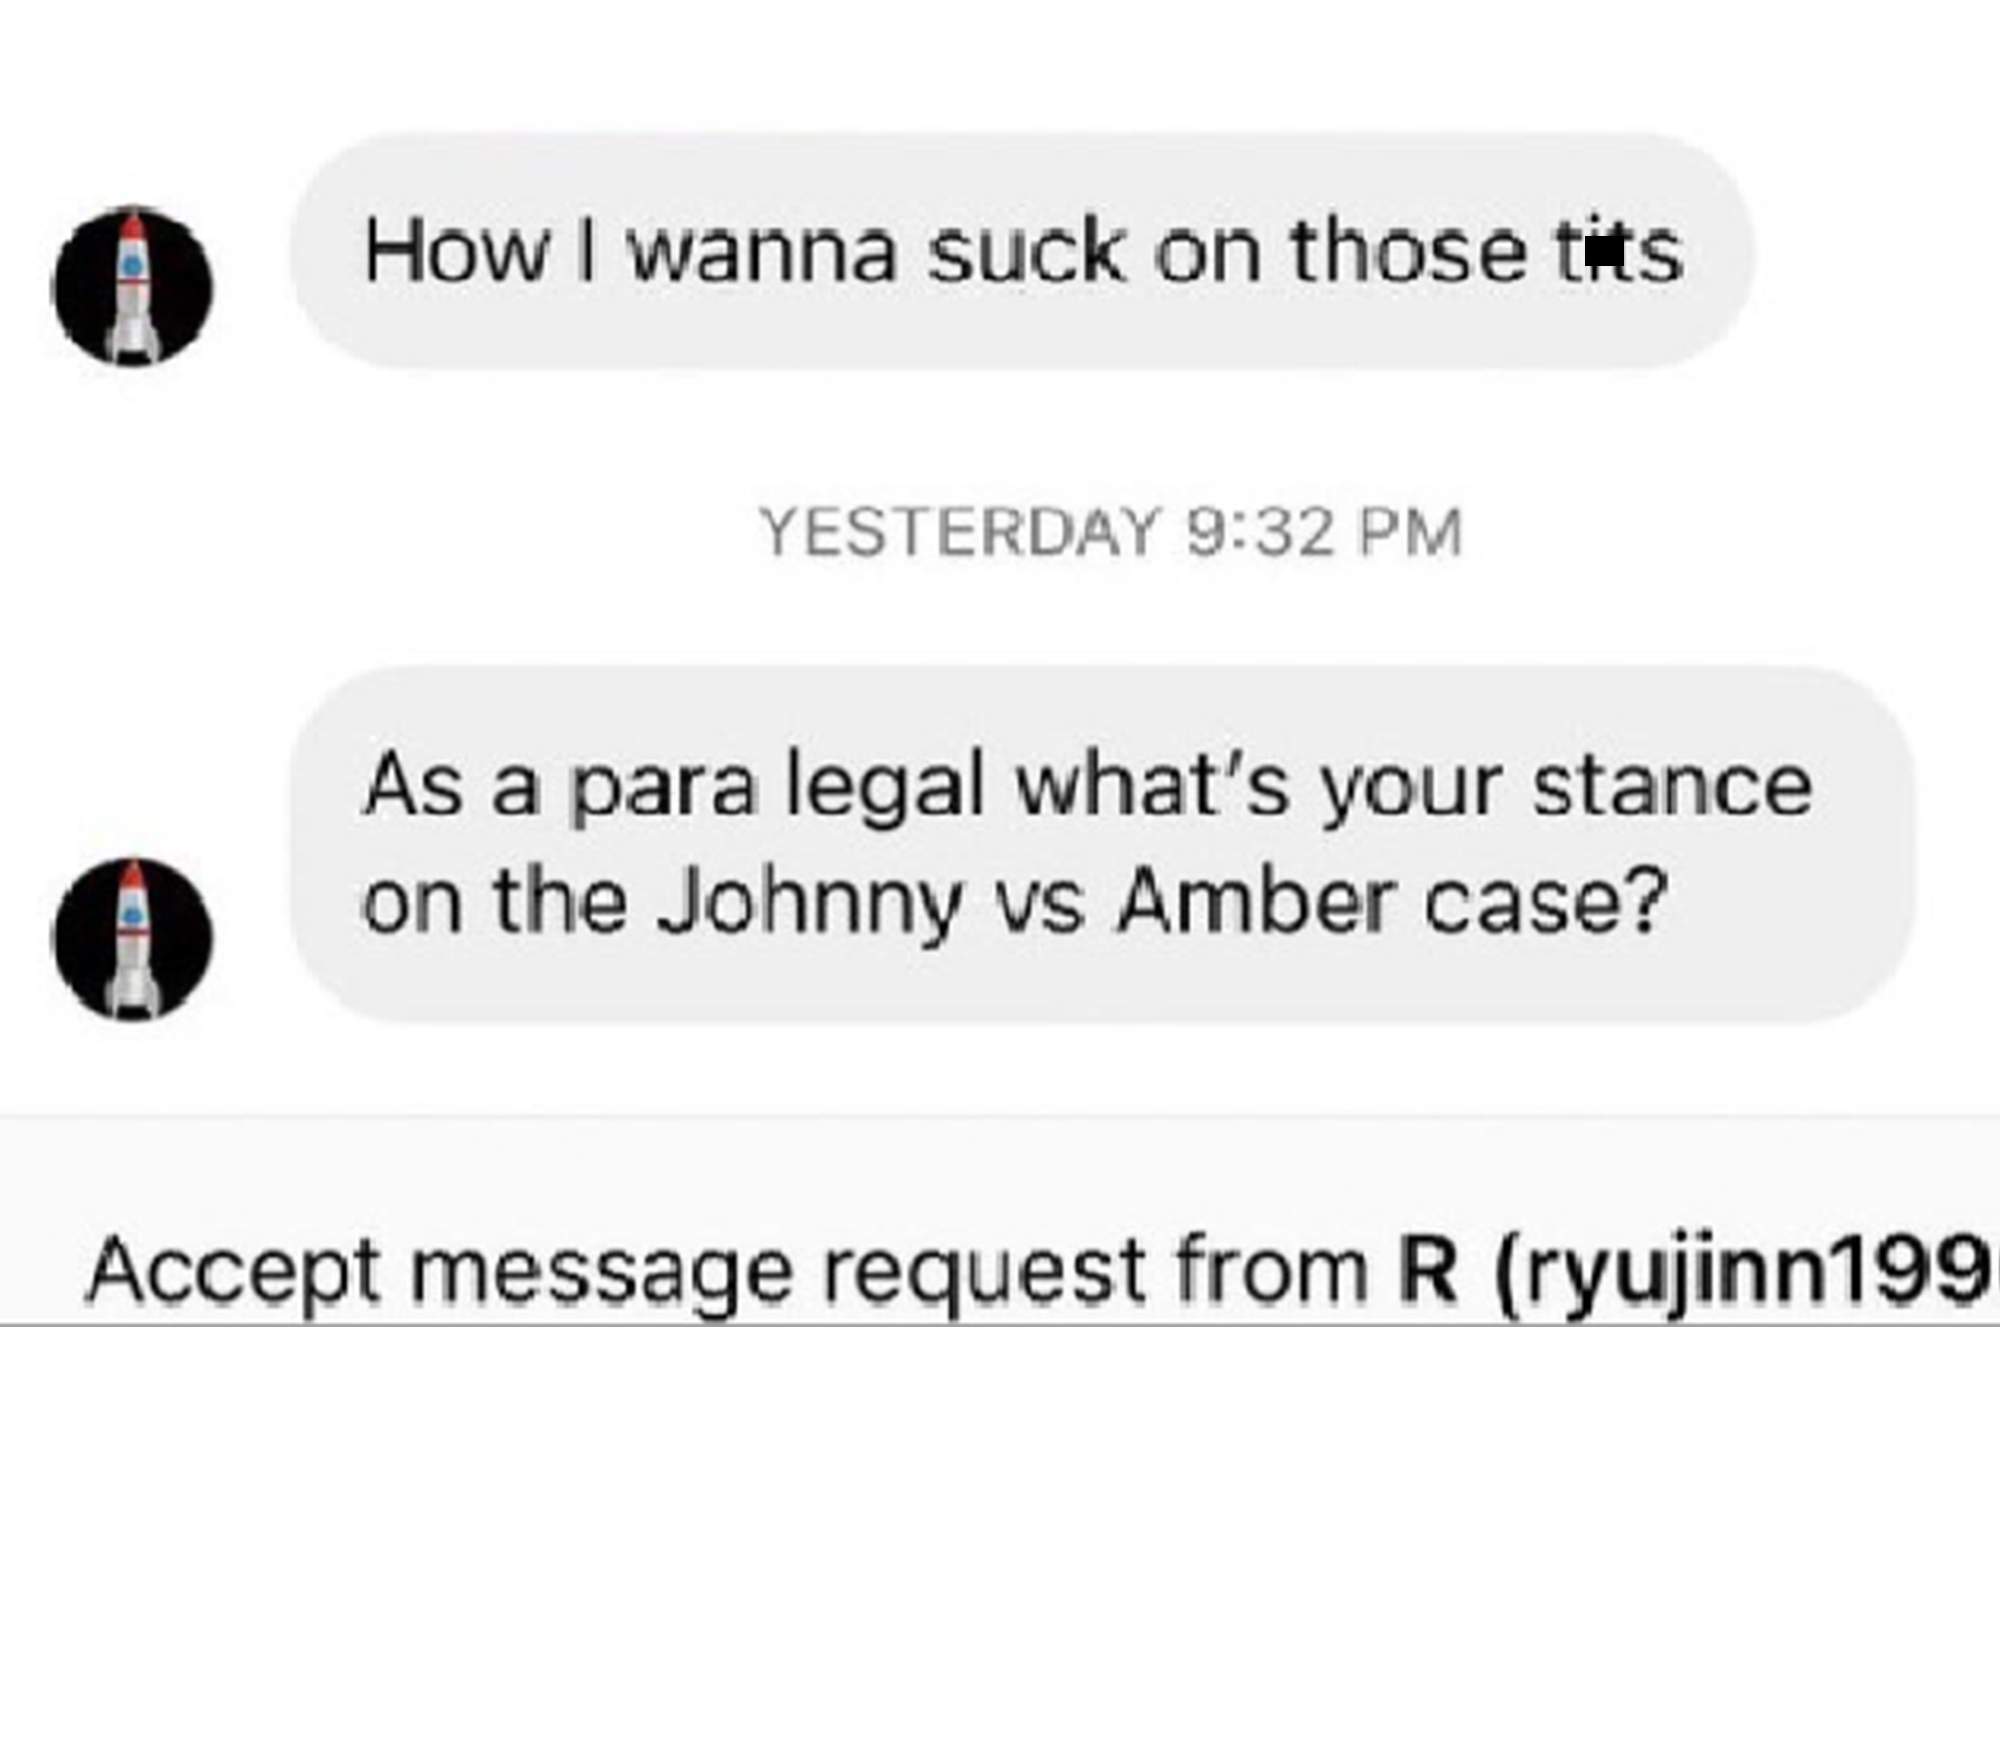 Unhinged Tweets - communication - How I wanna suck on those tits Yesterday As a para legal what's your stance on the Johnny vs Amber case? Accept message request from R ryujinn199 Pad C